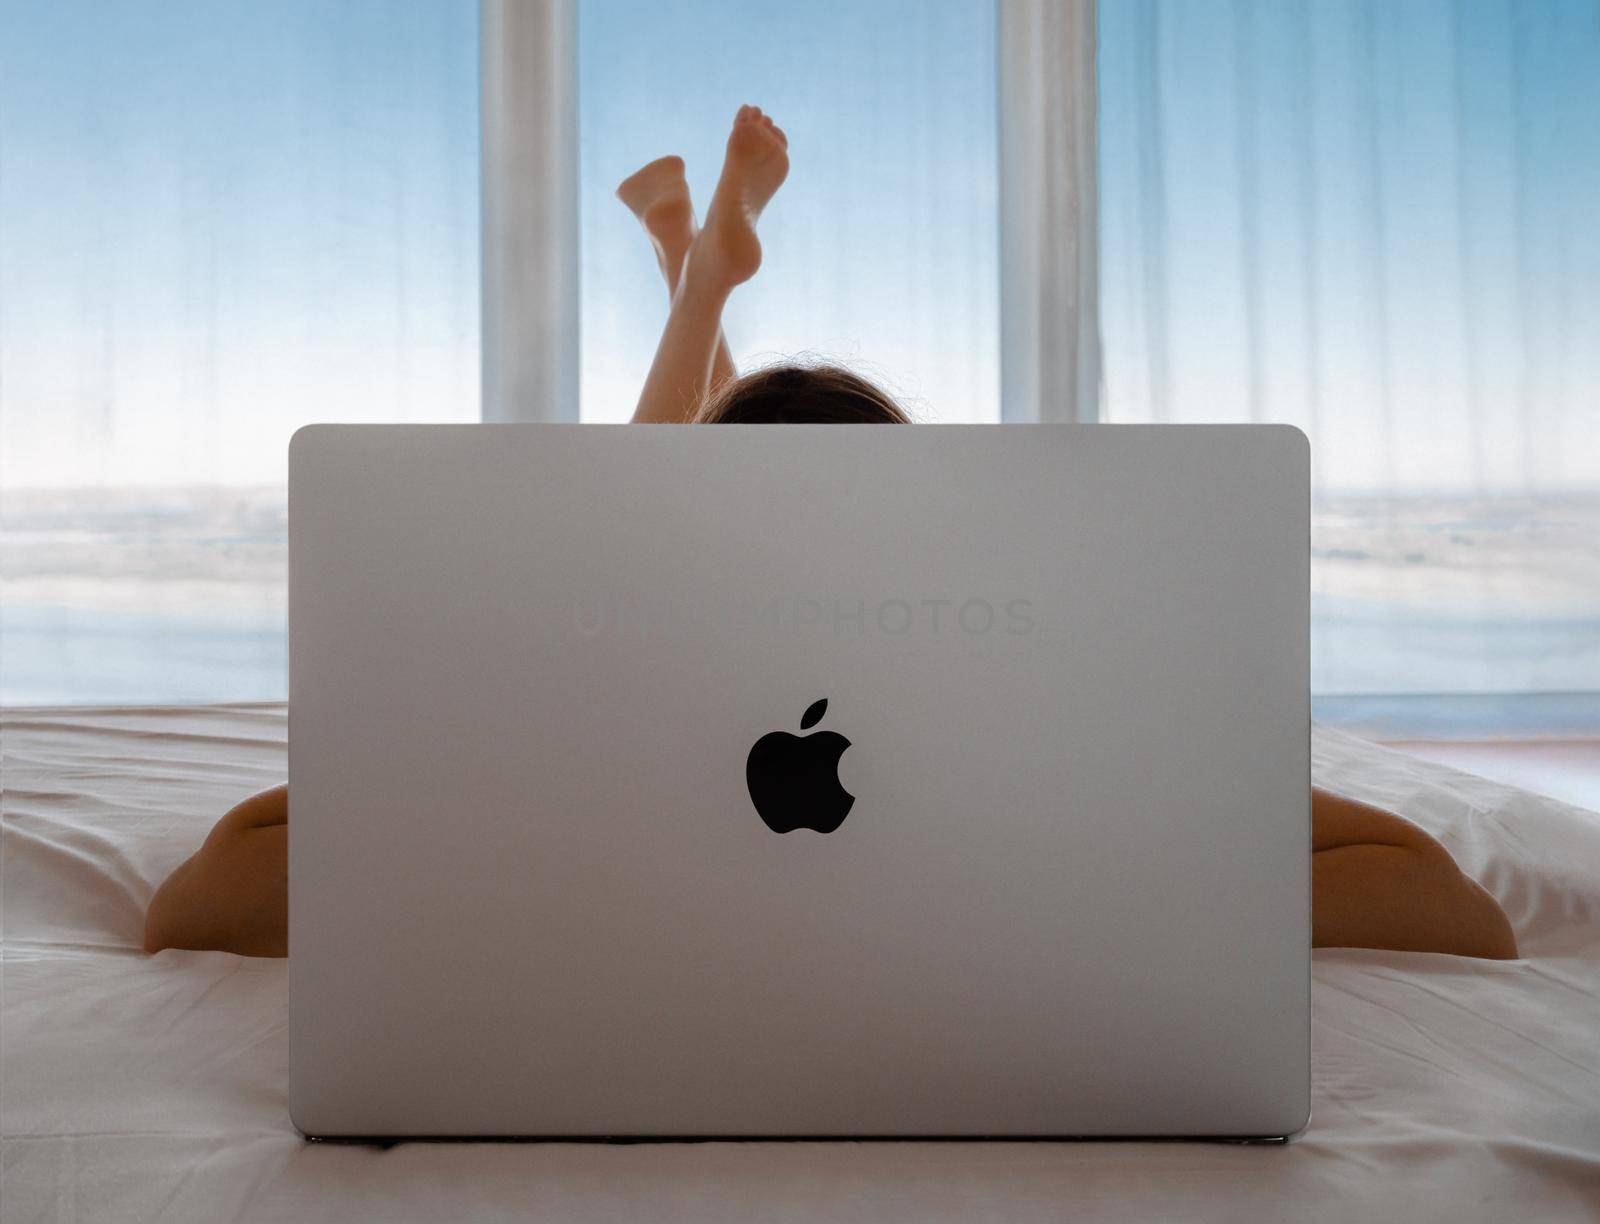 Womanl lying in bed using behind mackbook pro, panoramic windows, sea background by fascinadora